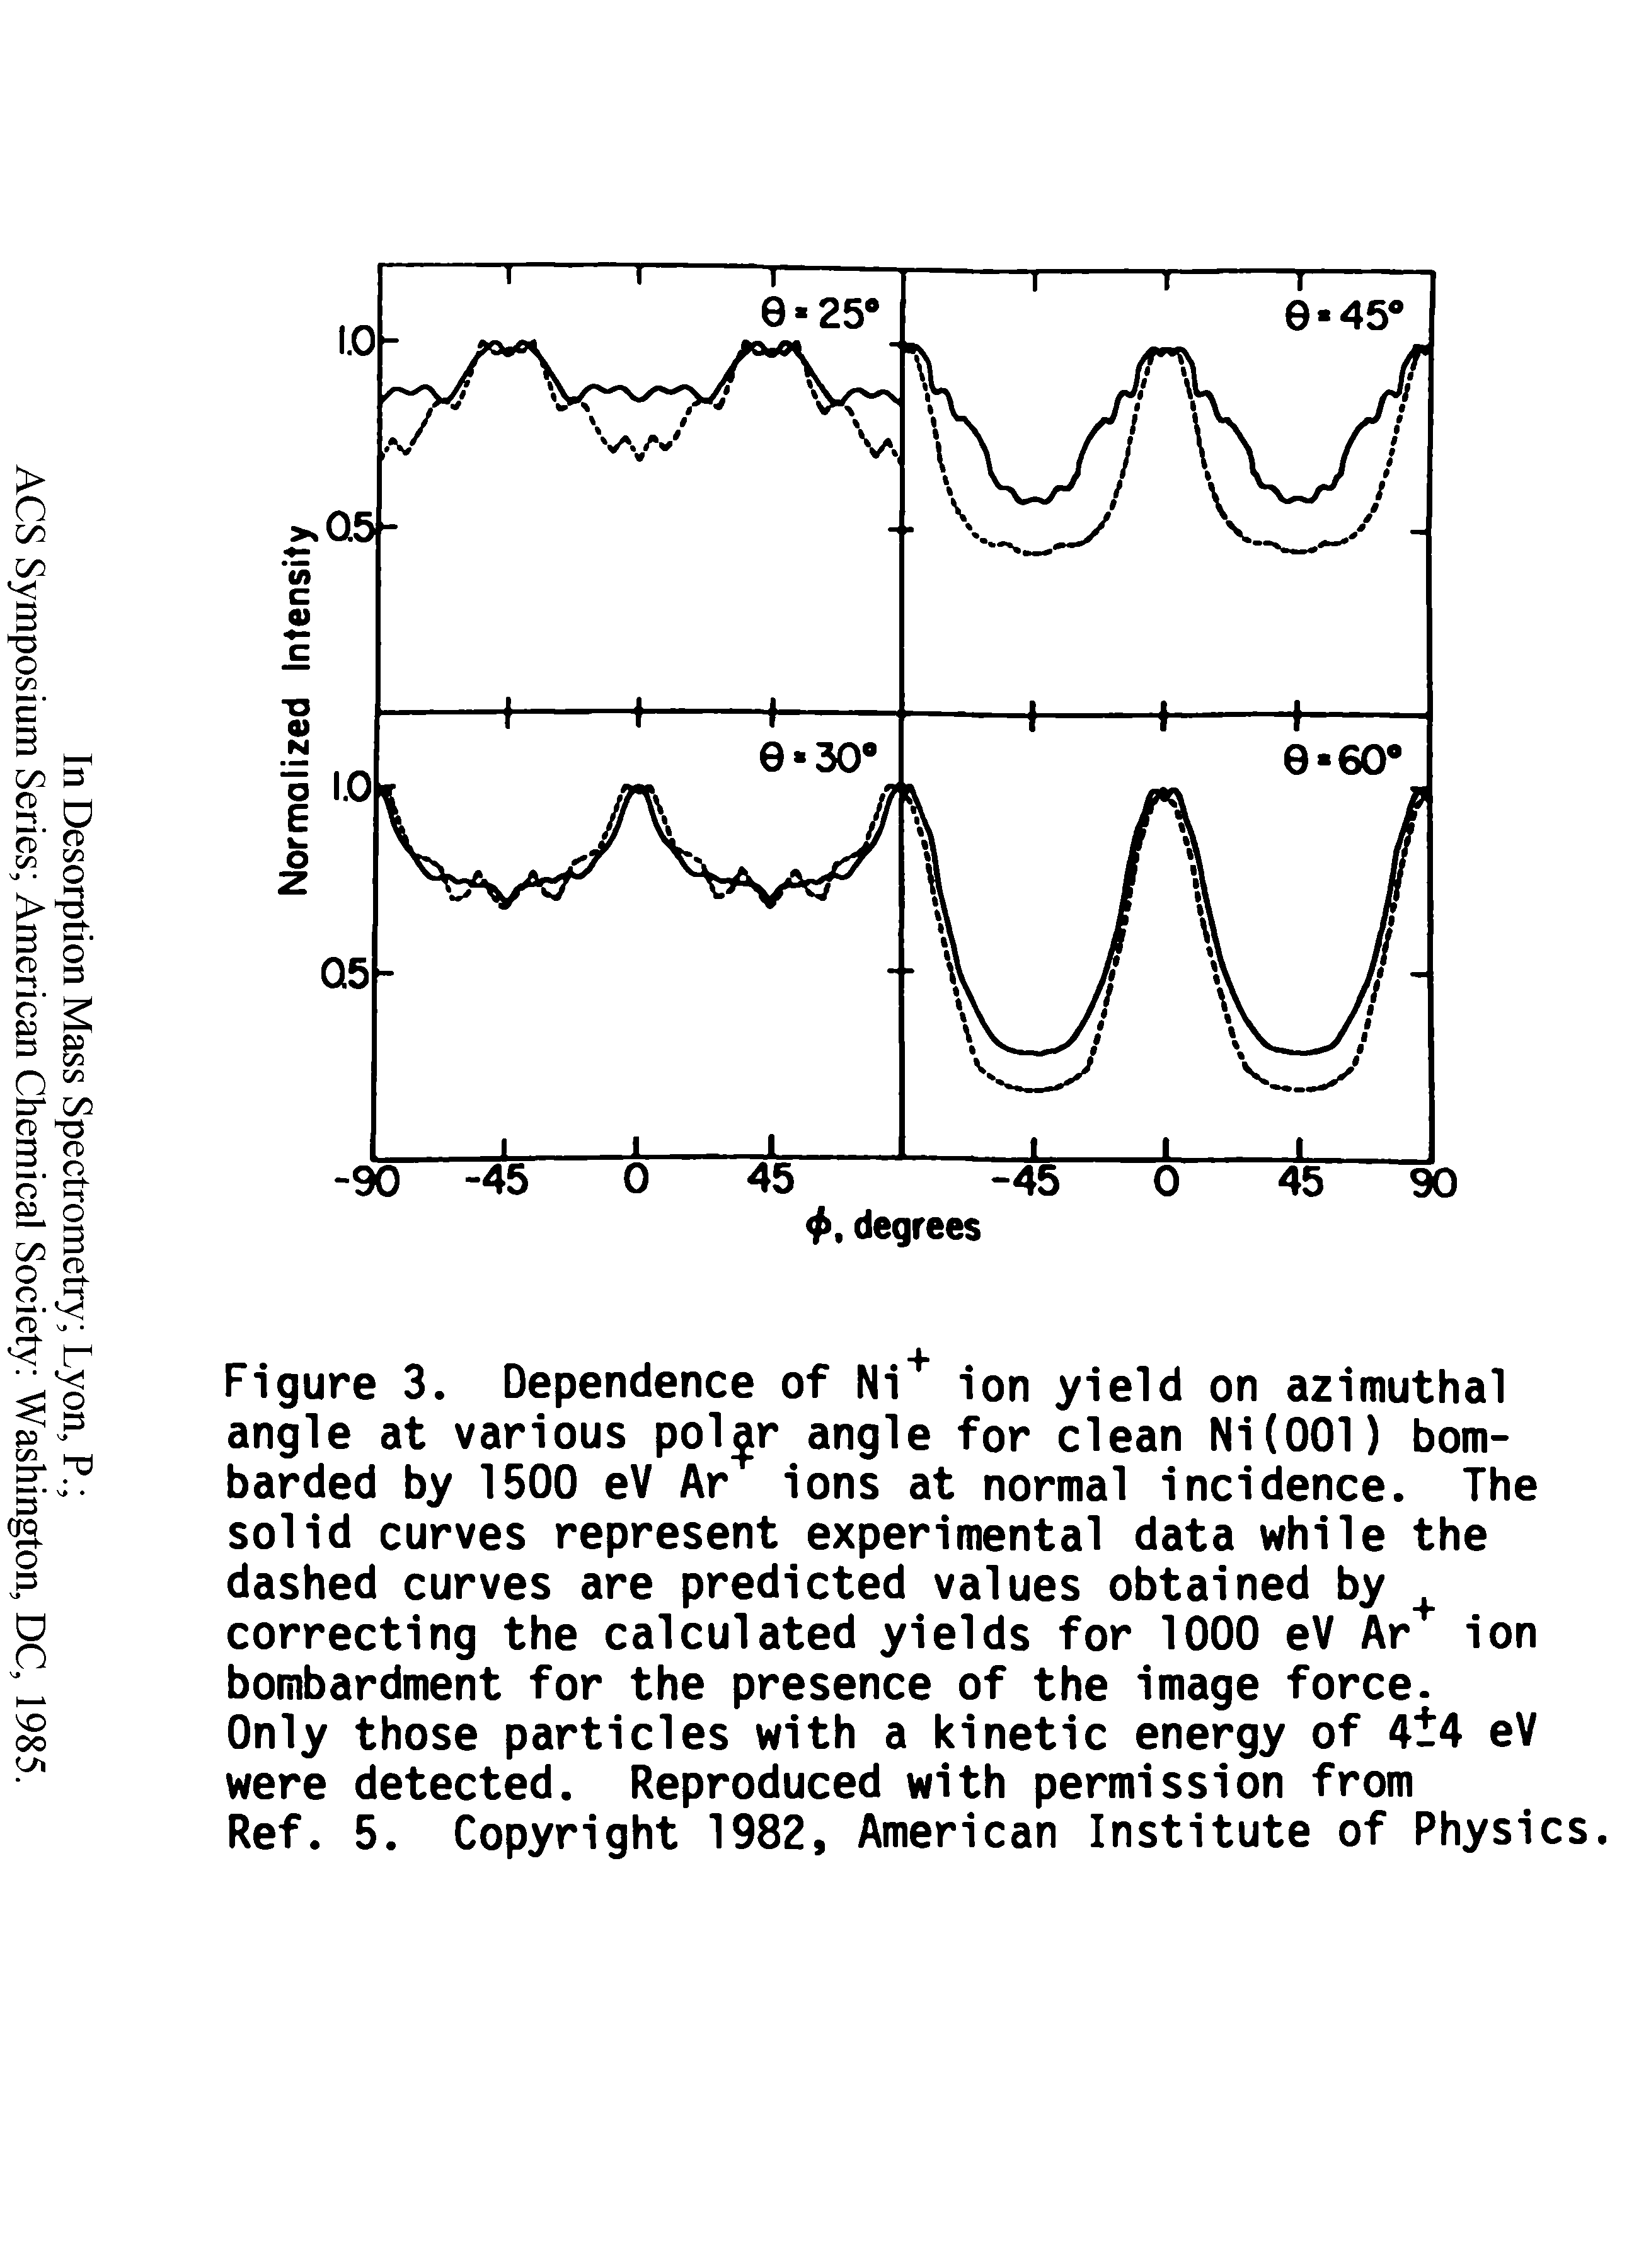 Figure 3. Dependence of Ni ion yield on azimuthal angle at various pol r angle for clean Ni(001) bombarded by 1500 eV Ar ions at normal incidence. The solid curves represent experimental data while the dashed curves are predicted values obtained by correcting the calculated yields for 1000 eV Ar ion bombardment for the presence of the image force.